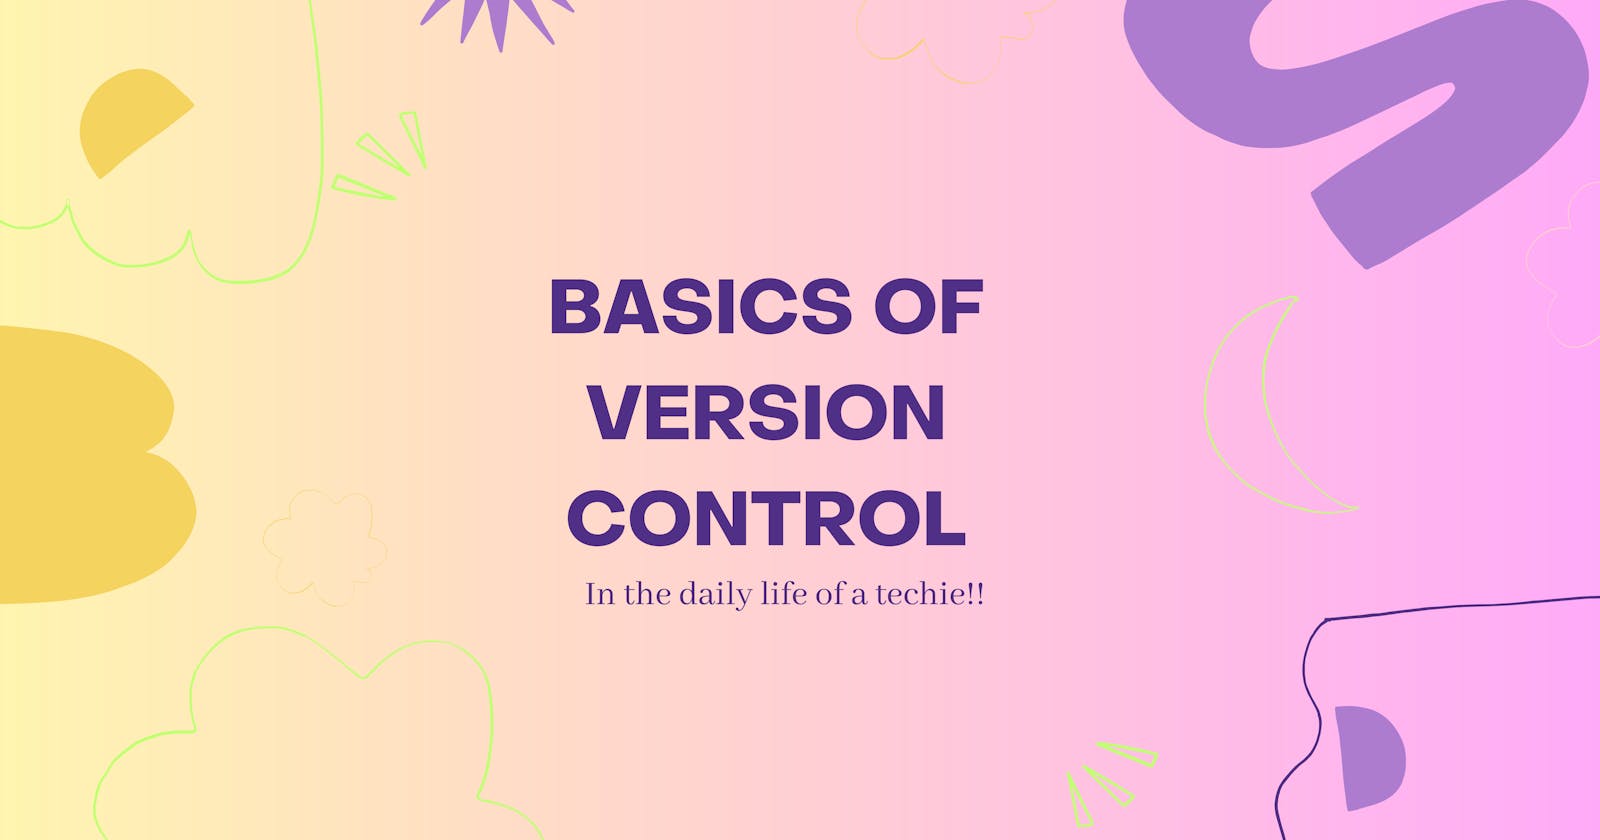 Basics of Version Control in the Daily Life of a Techie!